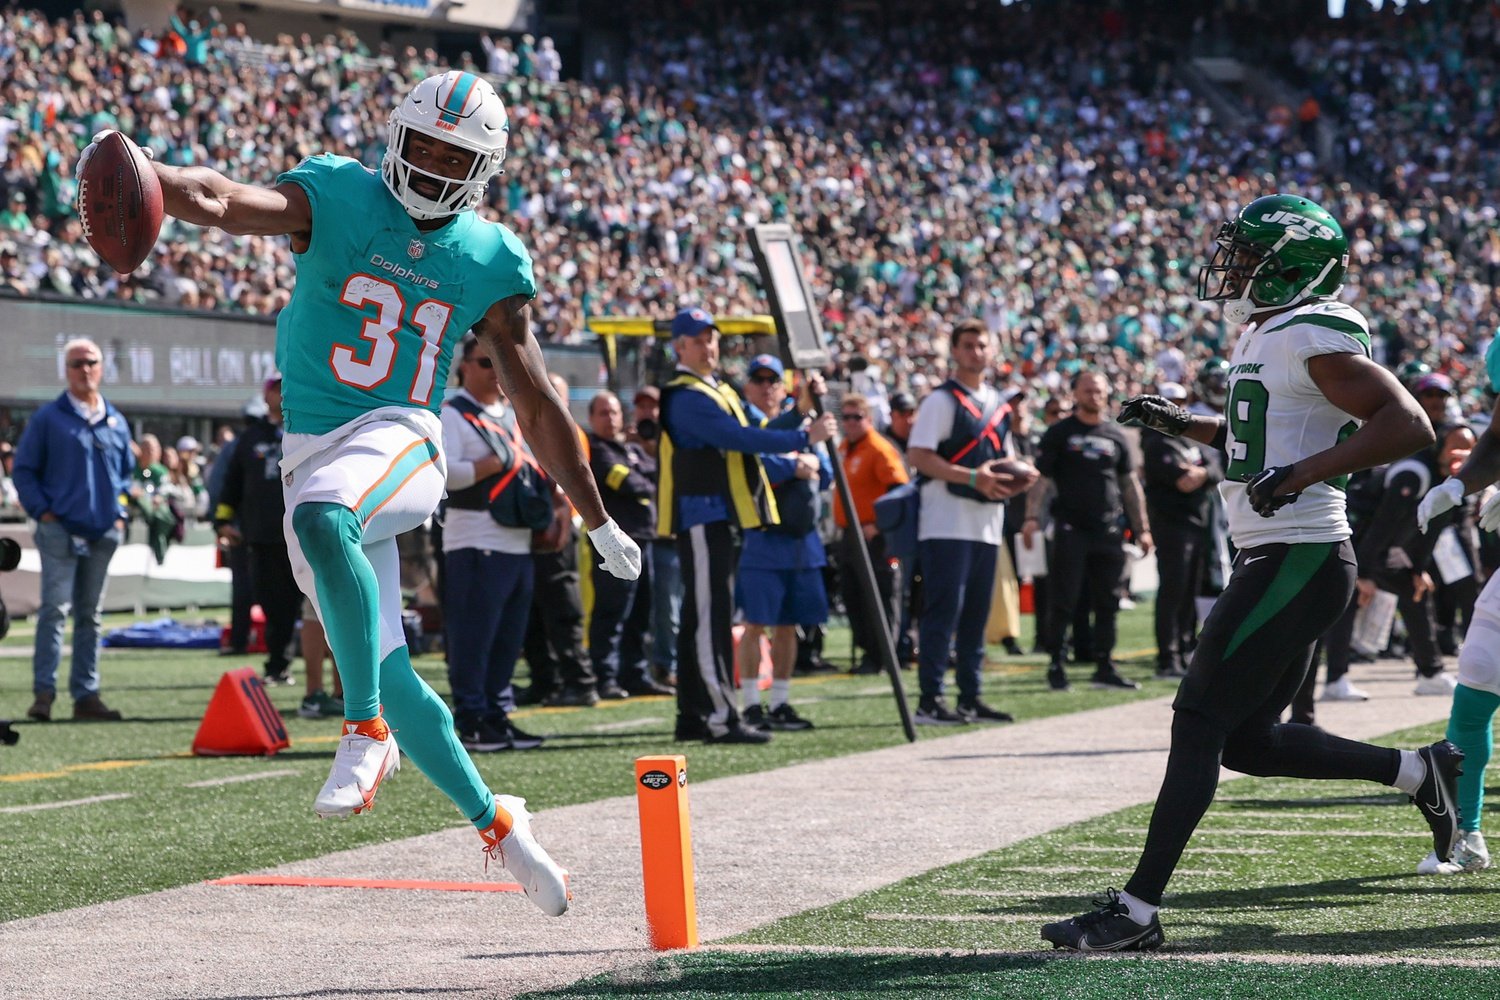 GAME PHOTOS: Week 7 at Dolphins